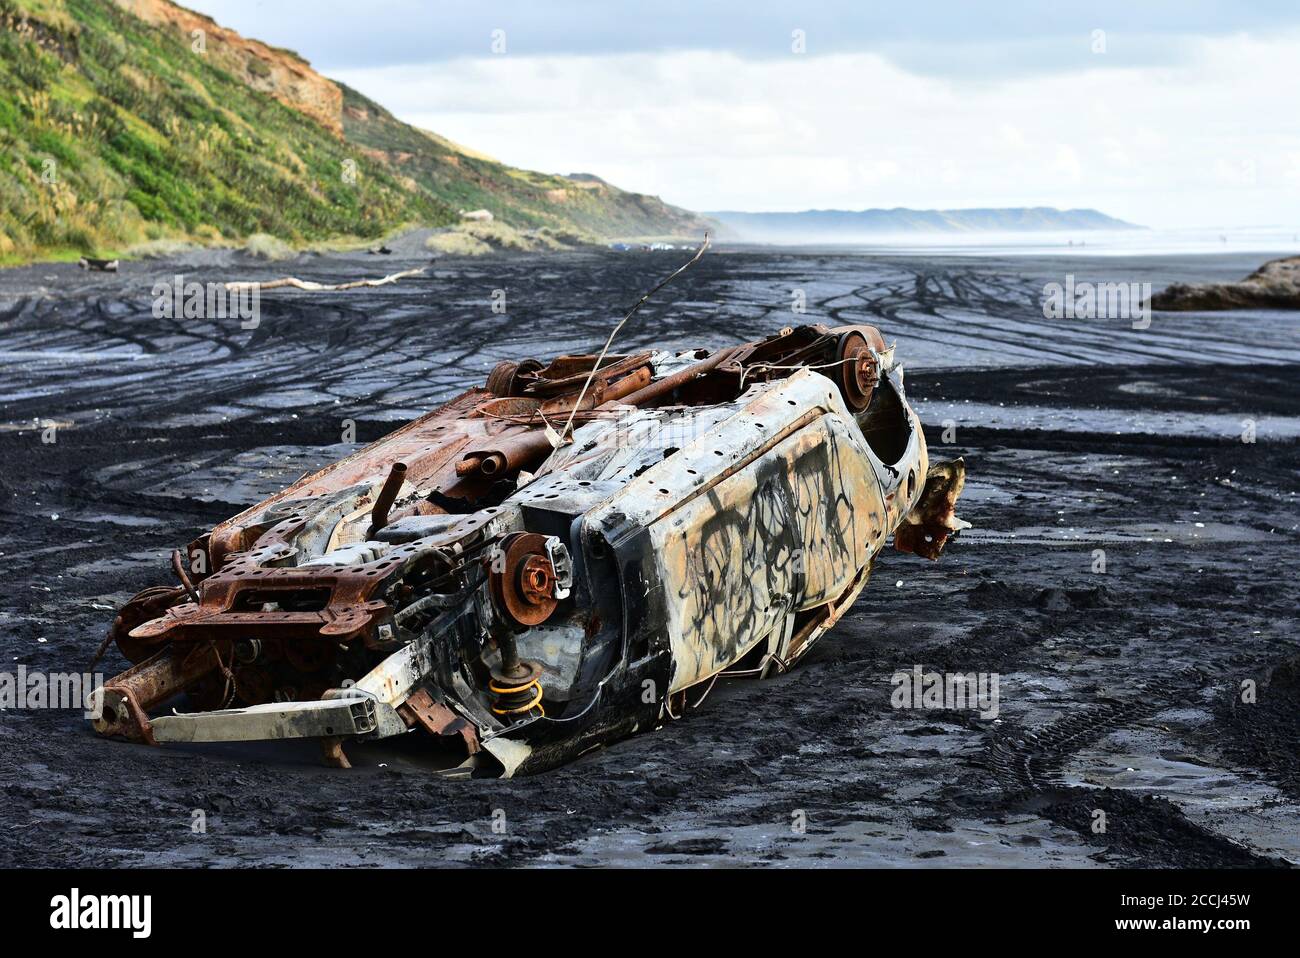 A car caught by high tide and left abandoned on black sand of Karioitahi beach, New Zealand. Car wreck buried in black sand, semi-submerged in sand. Stock Photo